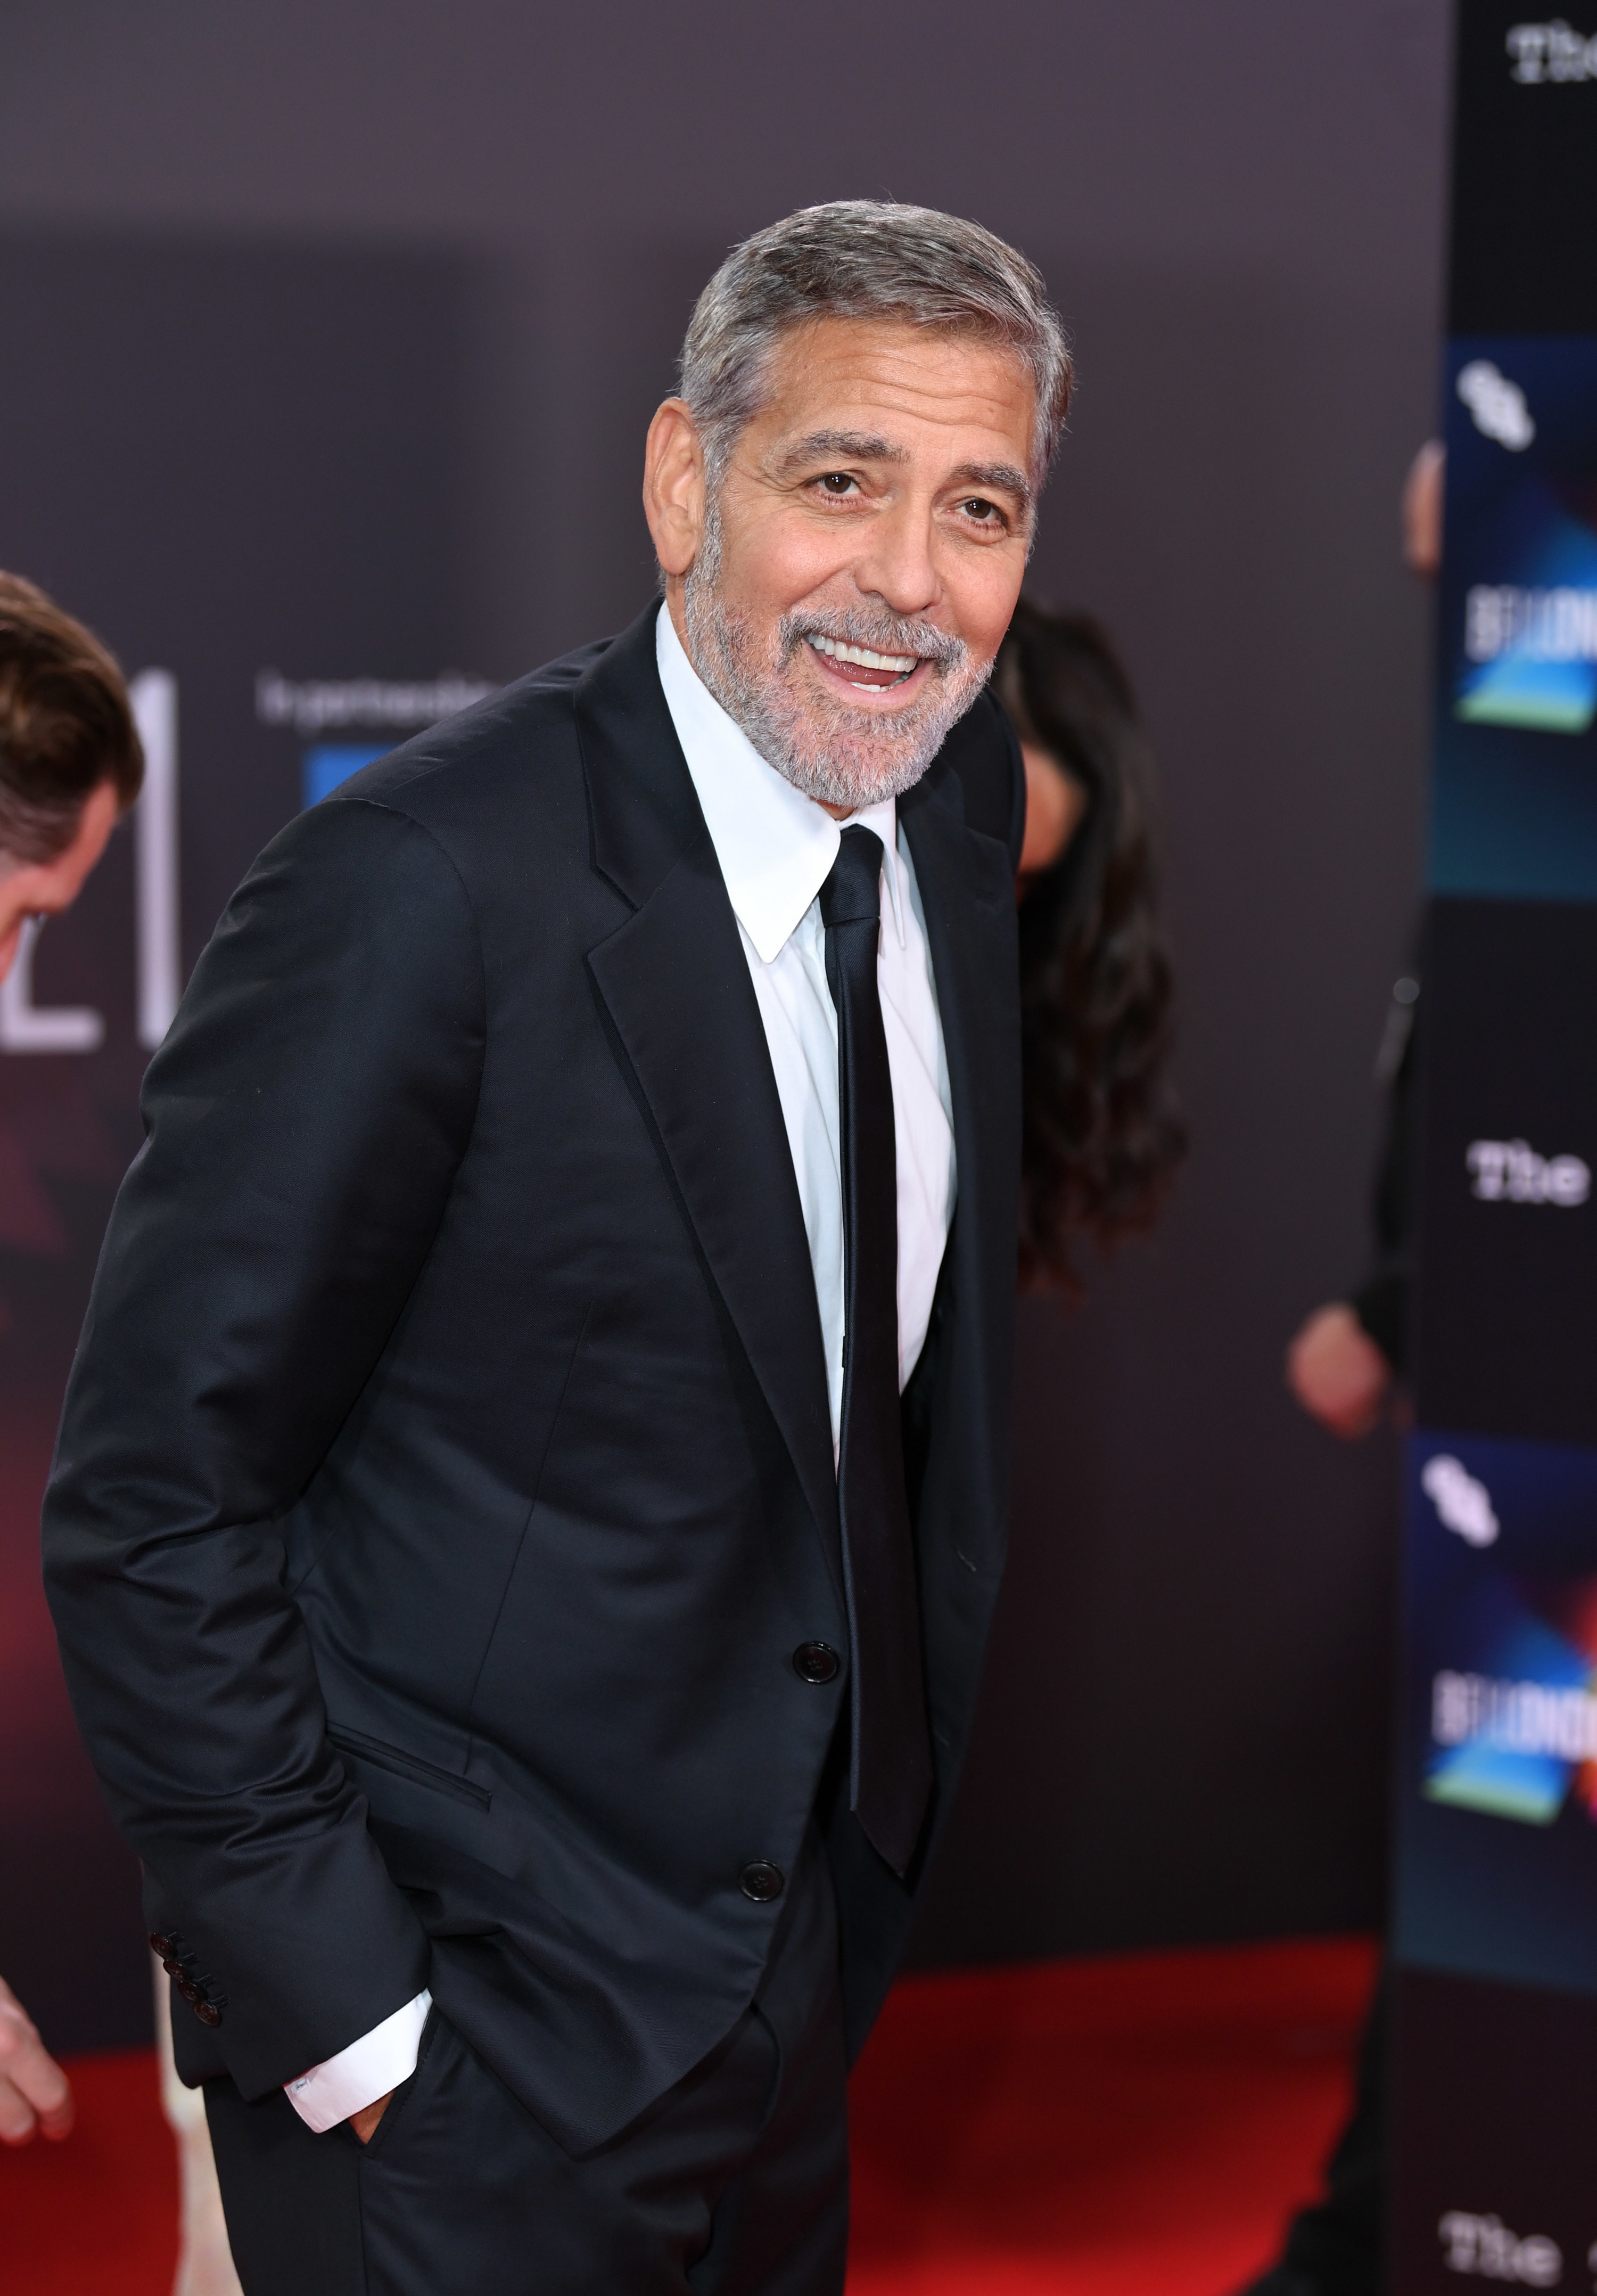 George Clooney attends &quot;The Tender Bar&quot; premiere in London, England